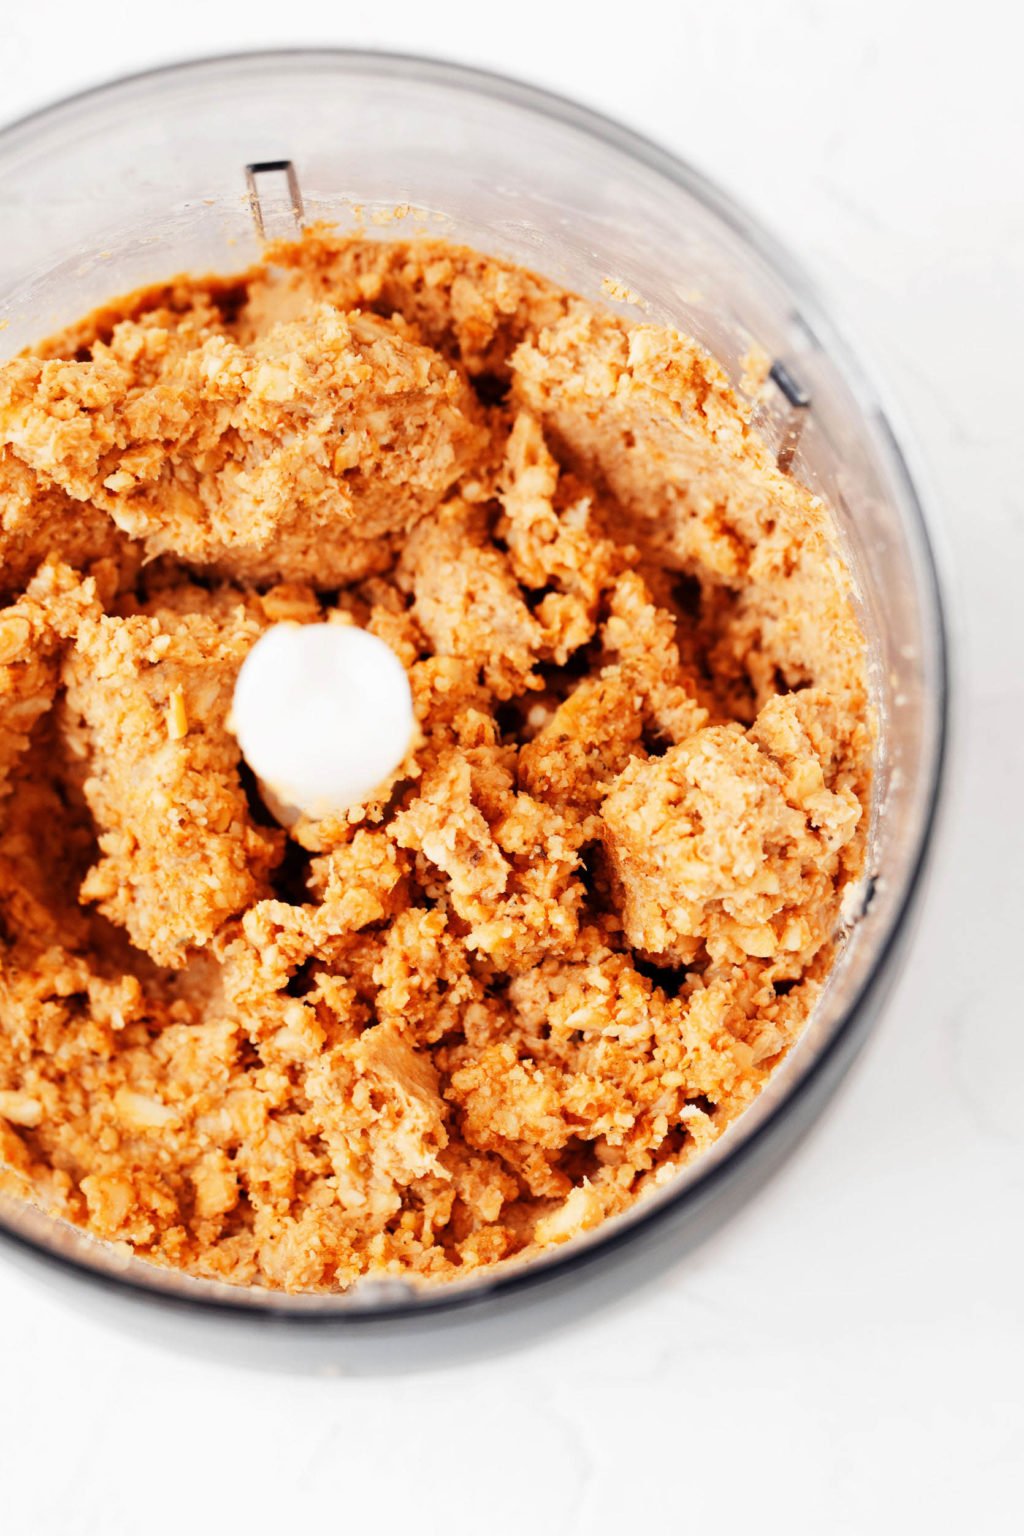 The bowl of a food processor has been filled with crumbled tempeh, herbs, and ground walnuts.